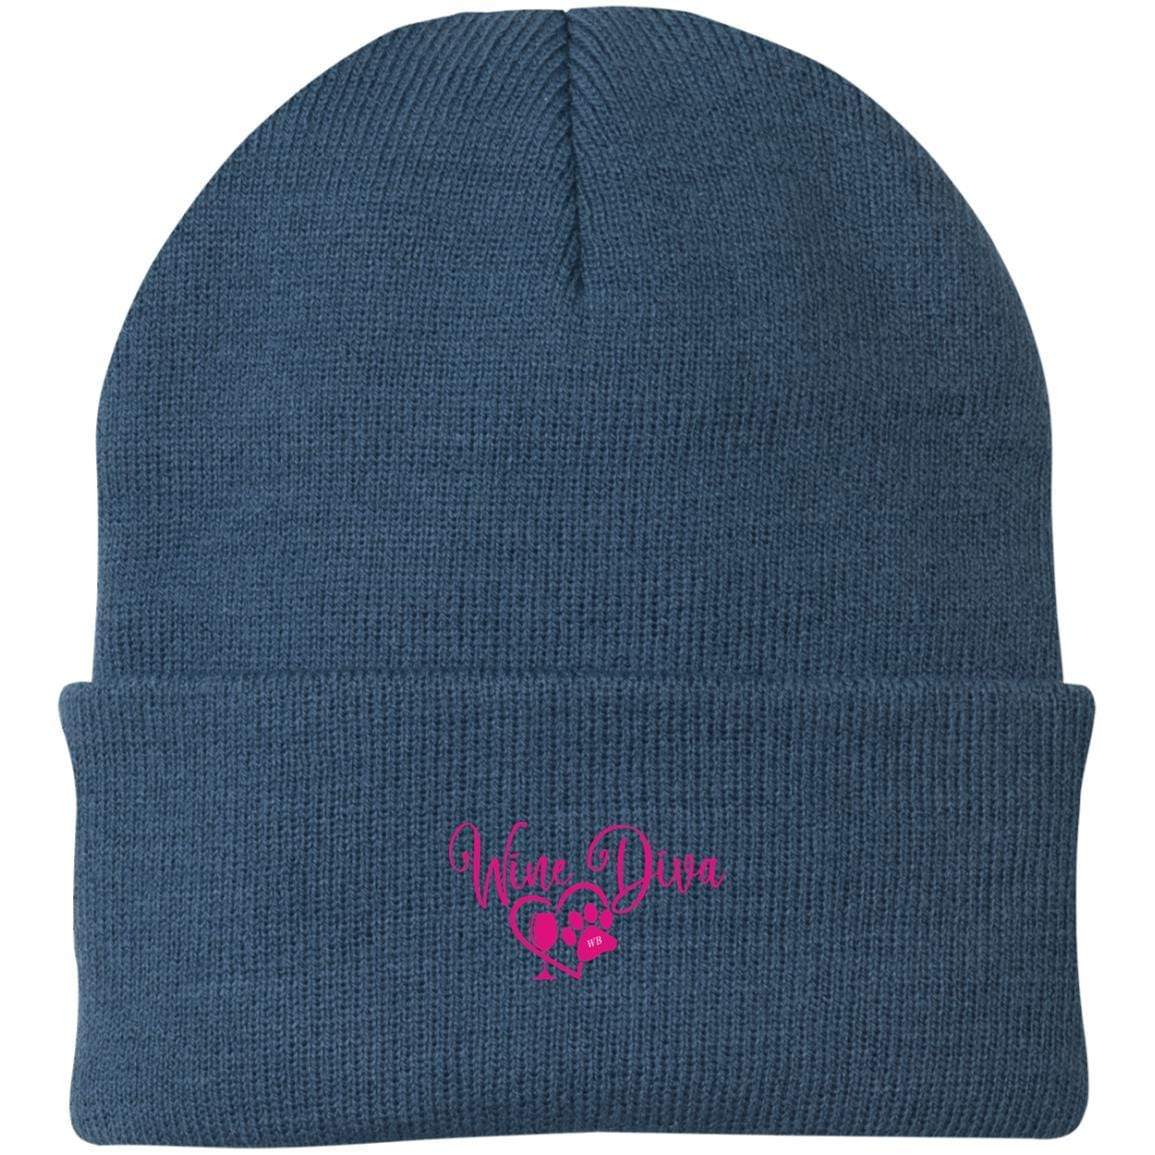 Hats Millennium Blue / One Size Winey Bitches Co "Wine Diva" Embroidered Knit Cap WineyBitchesCo